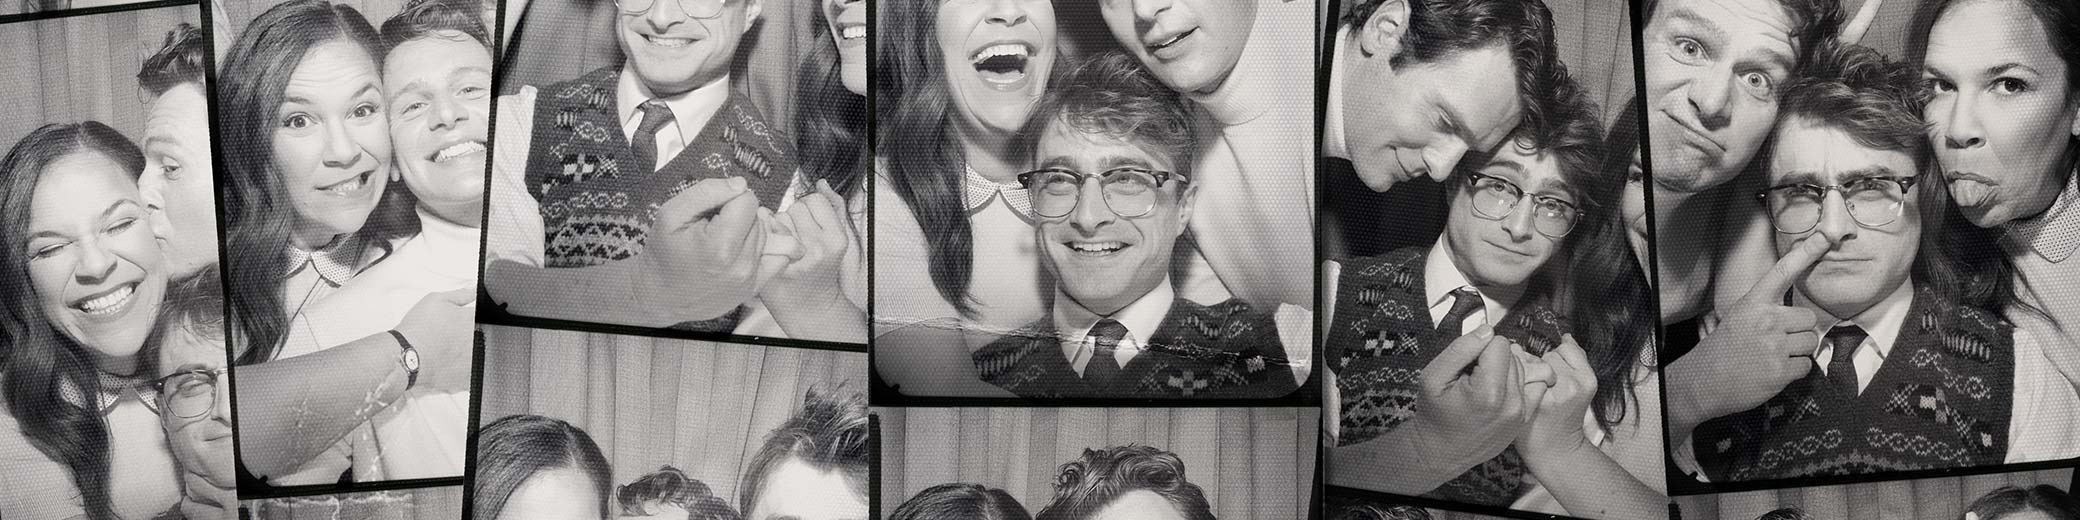 strips of photo booth photos depicting three friends, two male and one female, in various poses